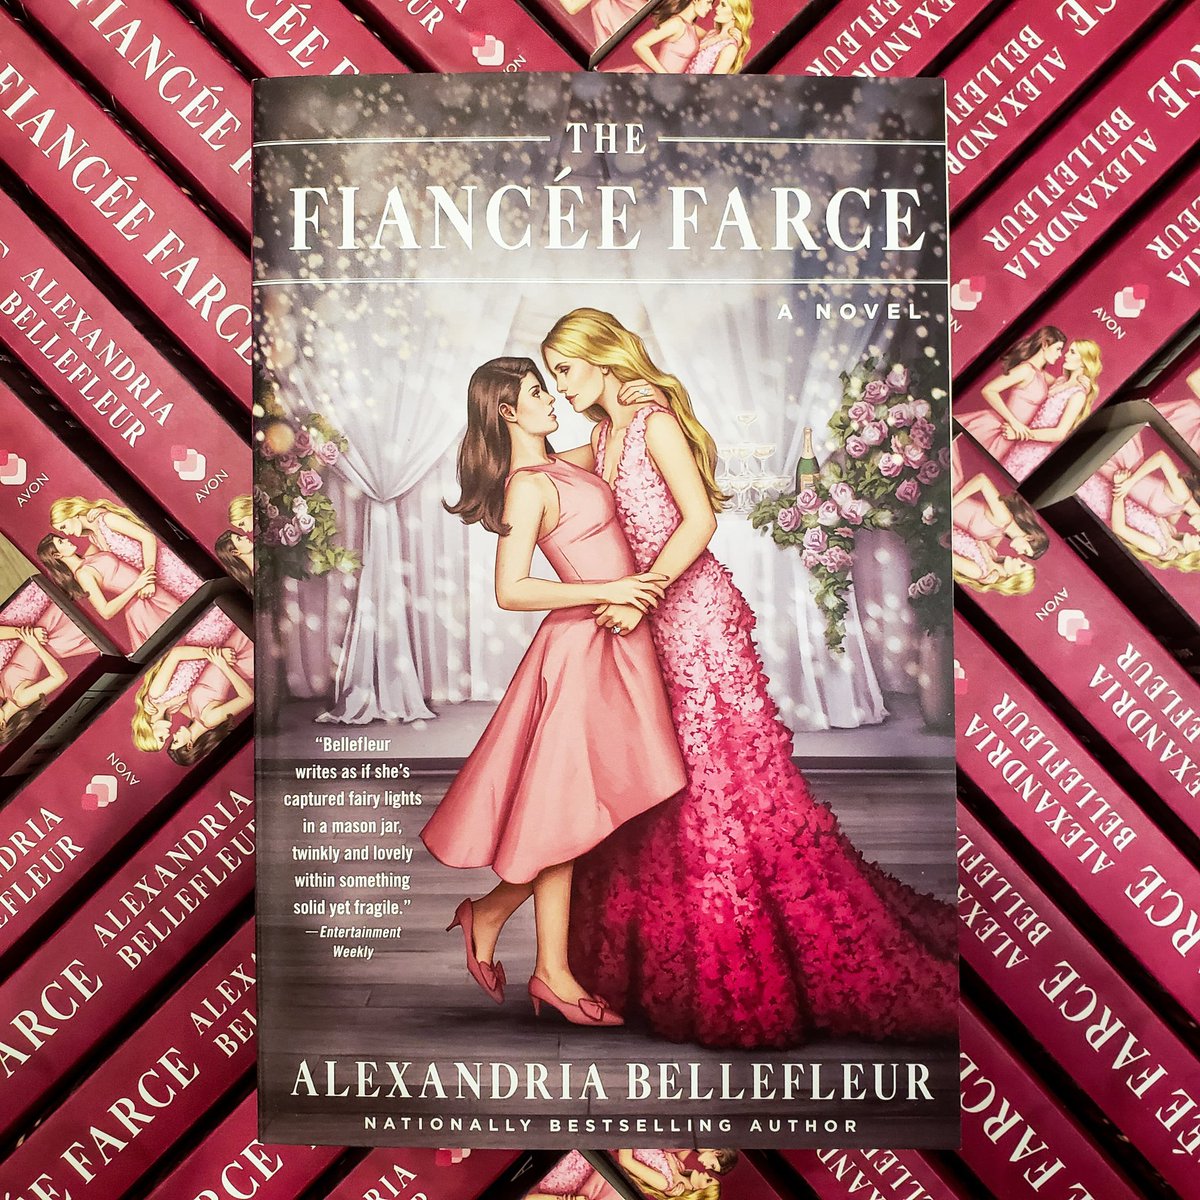 THE FIANCÉE FARCE is out now! 💍 sapphic marriage of convenience 📚 a quiet bookstore owner  + 🗞 a newspaper heiress who moonlights as a romance novel cover model 💋 Gossip Girl vibes 👠 Cinderella vibes 🧣 an abundance of Taylor Swift references geni.us/7leBjq